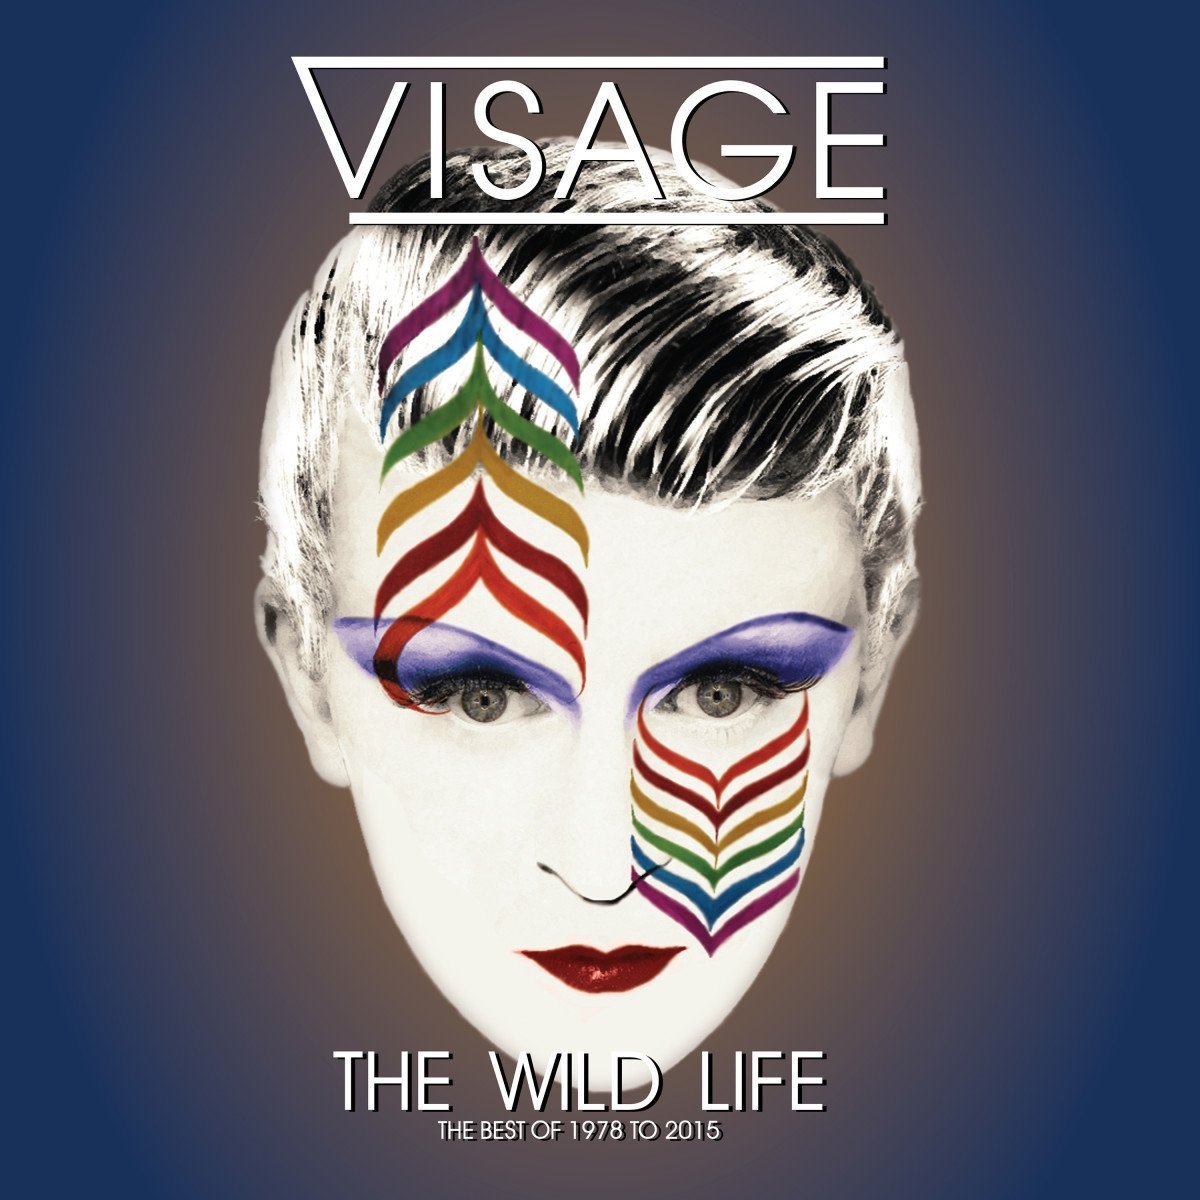 THE WILD LIFE - THE BEST OF 1978-2015